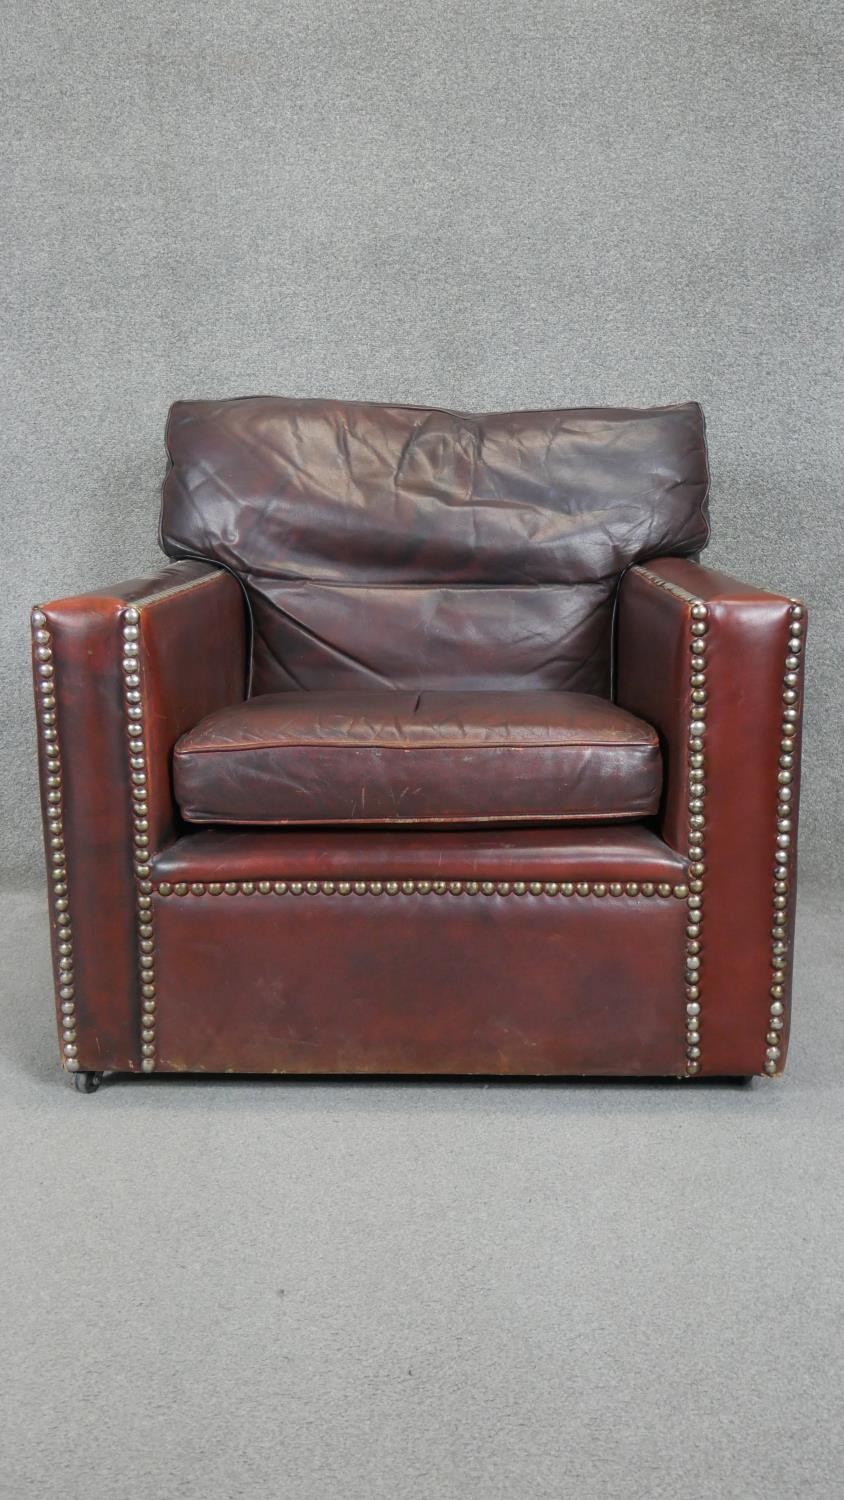 A pair of vintage library armchairs in studded tobacco leather upholstery. - Image 3 of 5